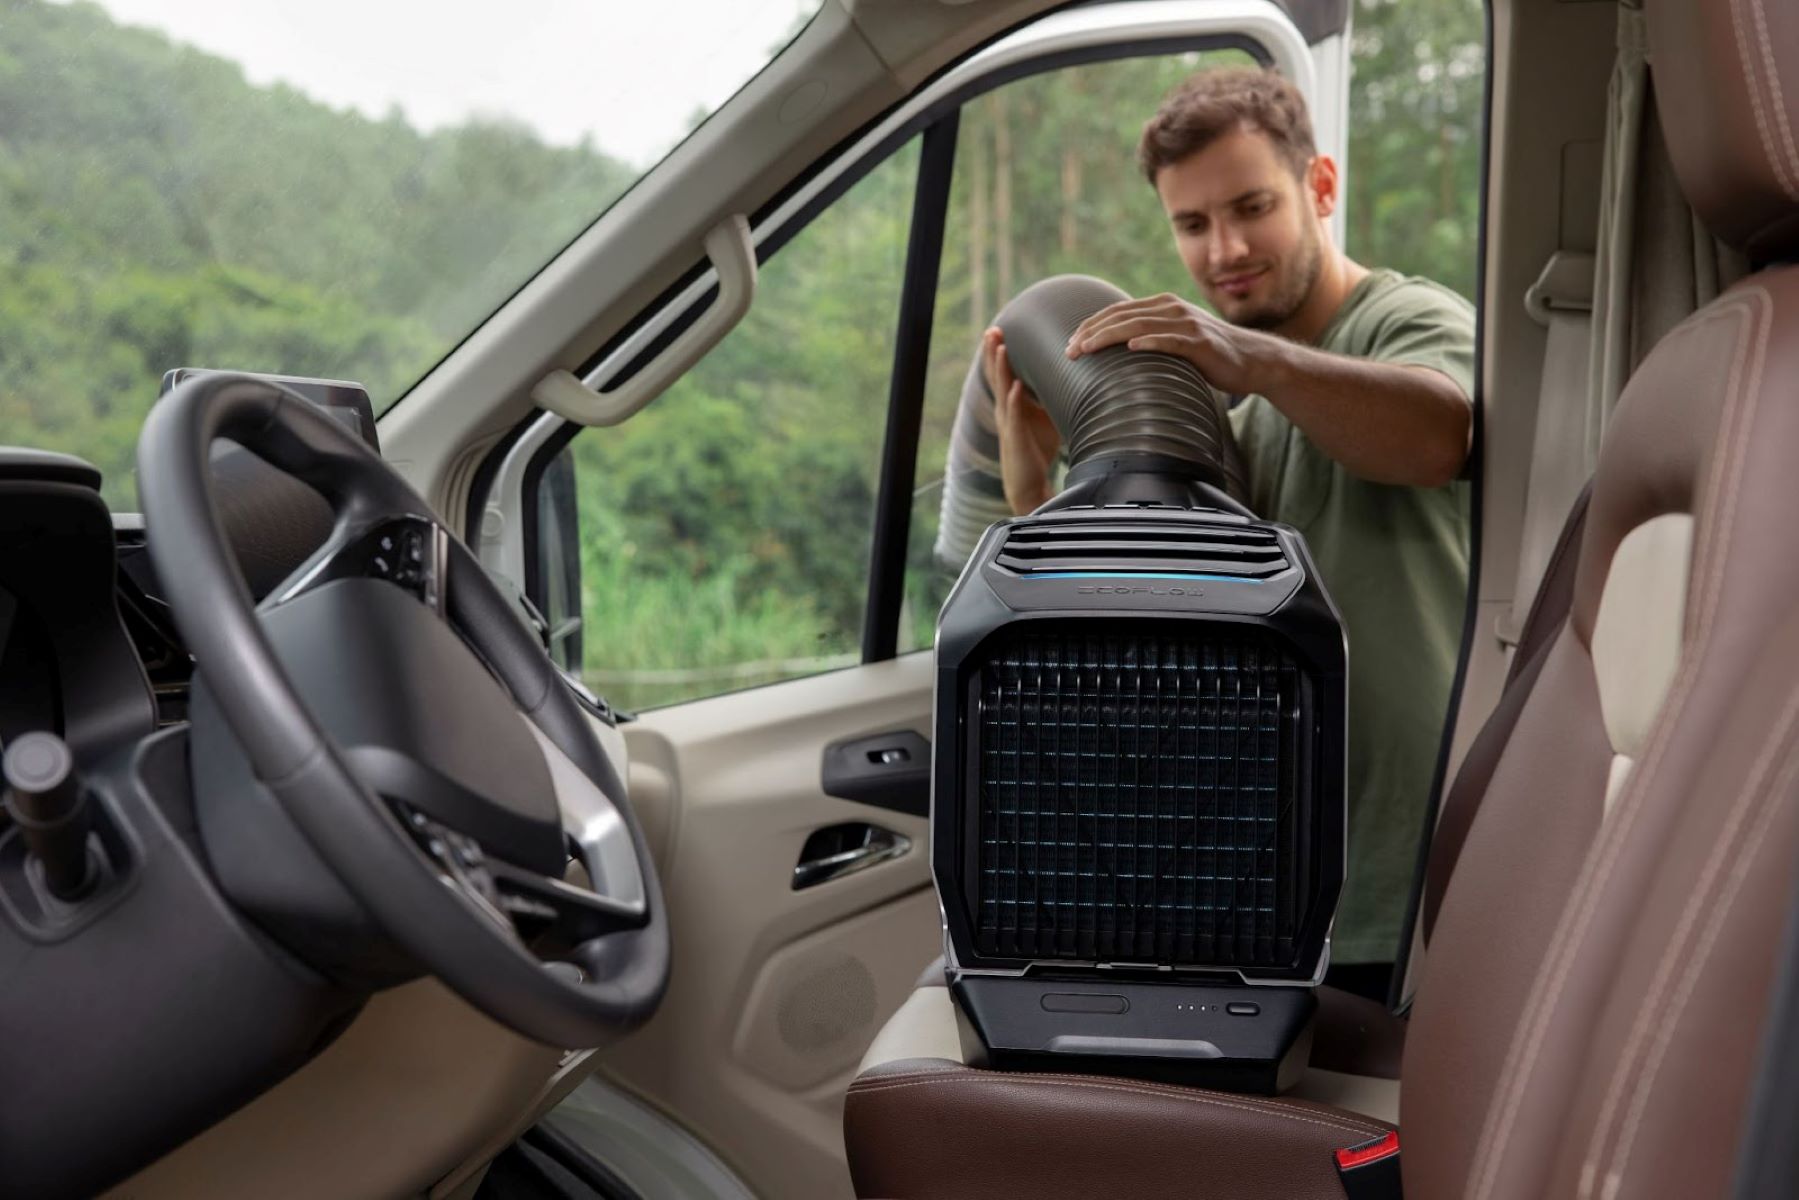 Can I Install A Portable AC In My Car To Avoid Costly Repairs? Affordable Options Available.